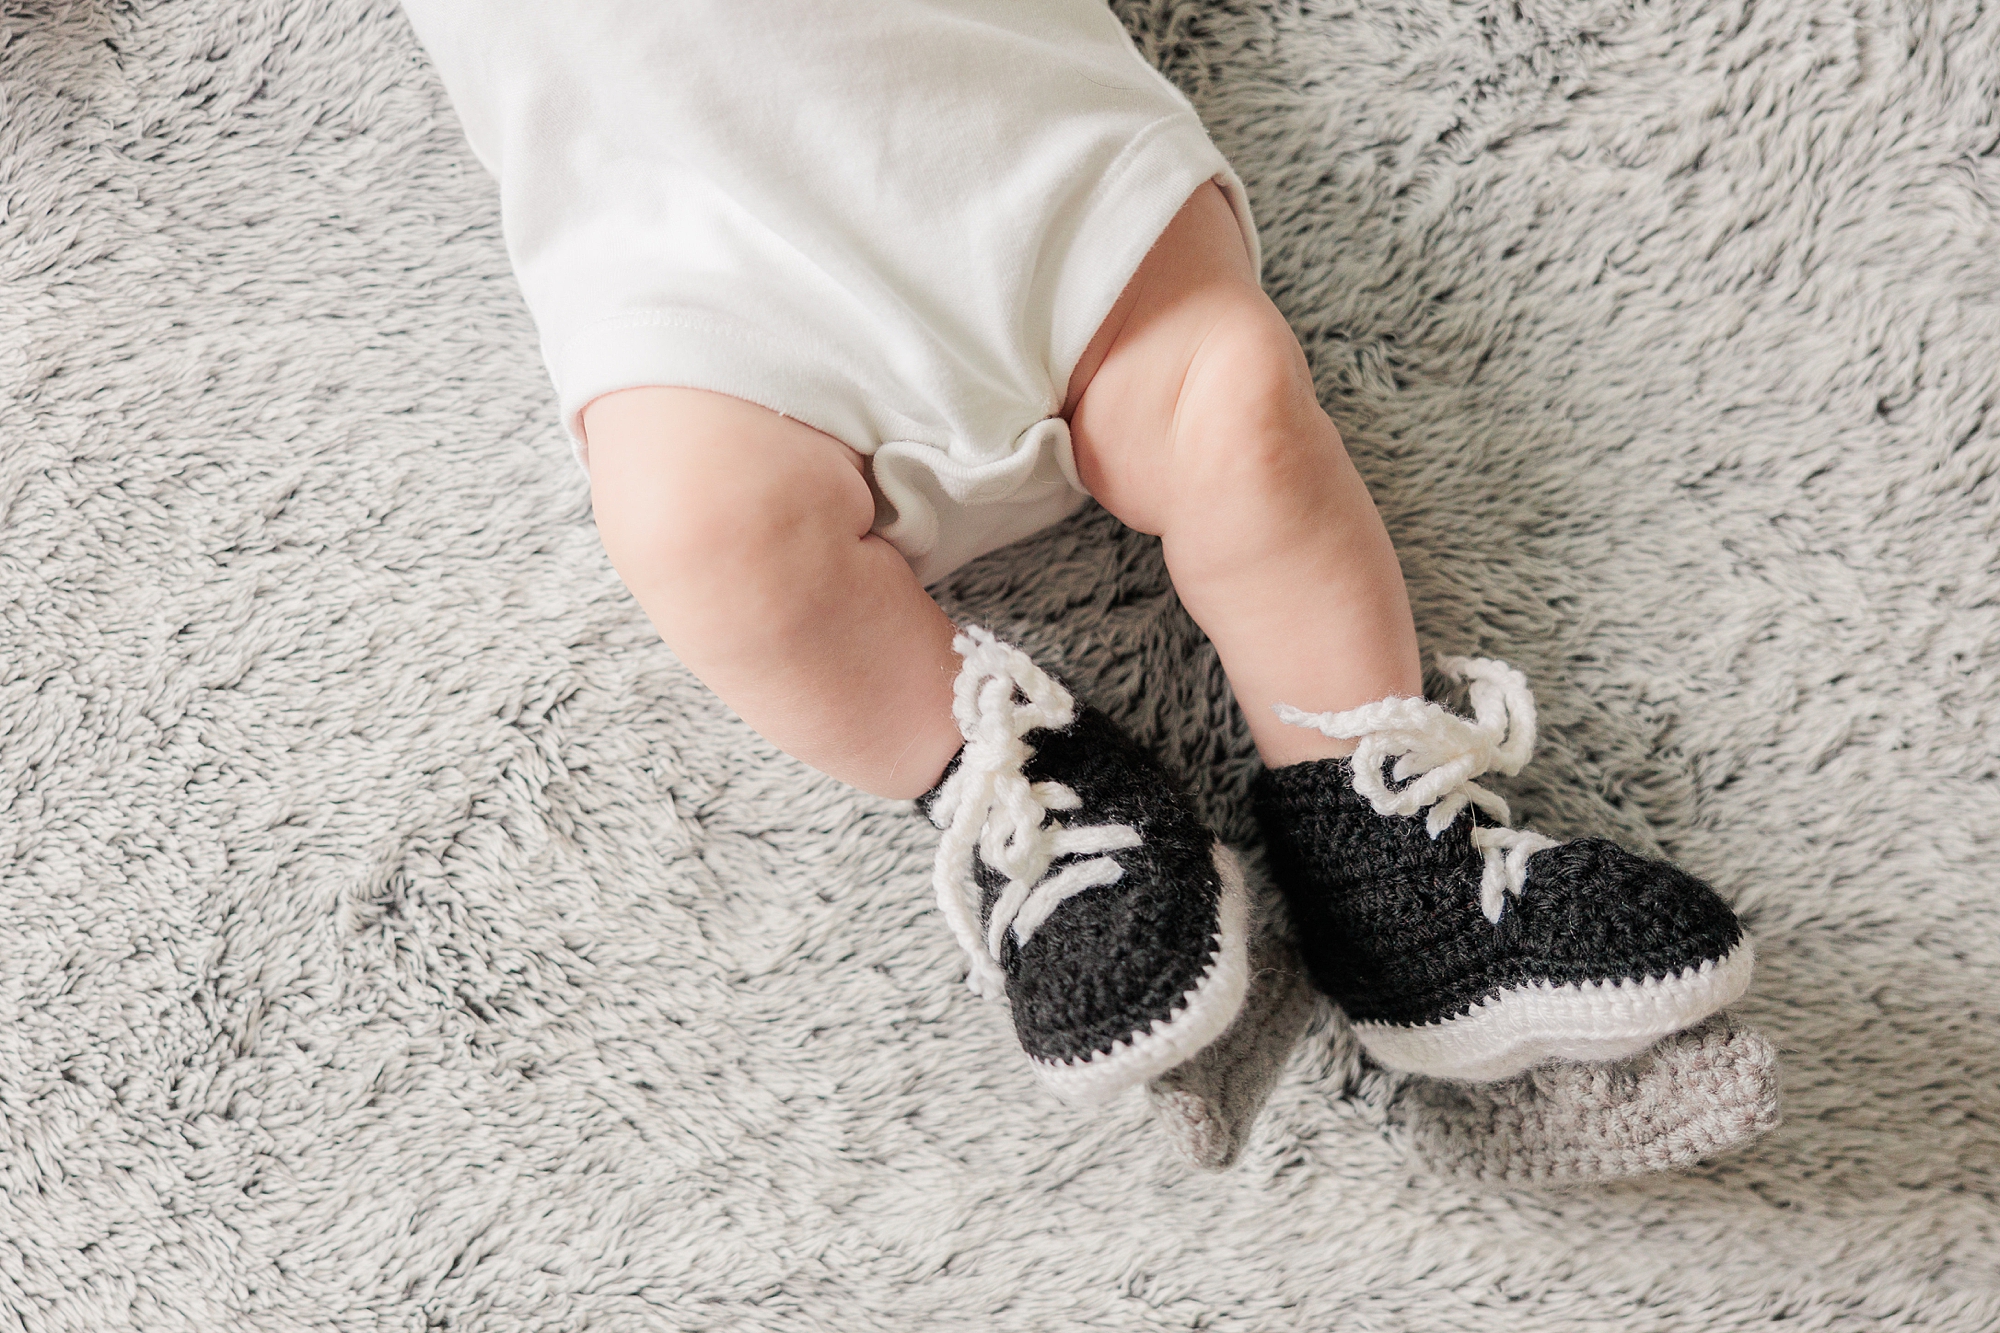 baby lays with knit shoes on their feet 